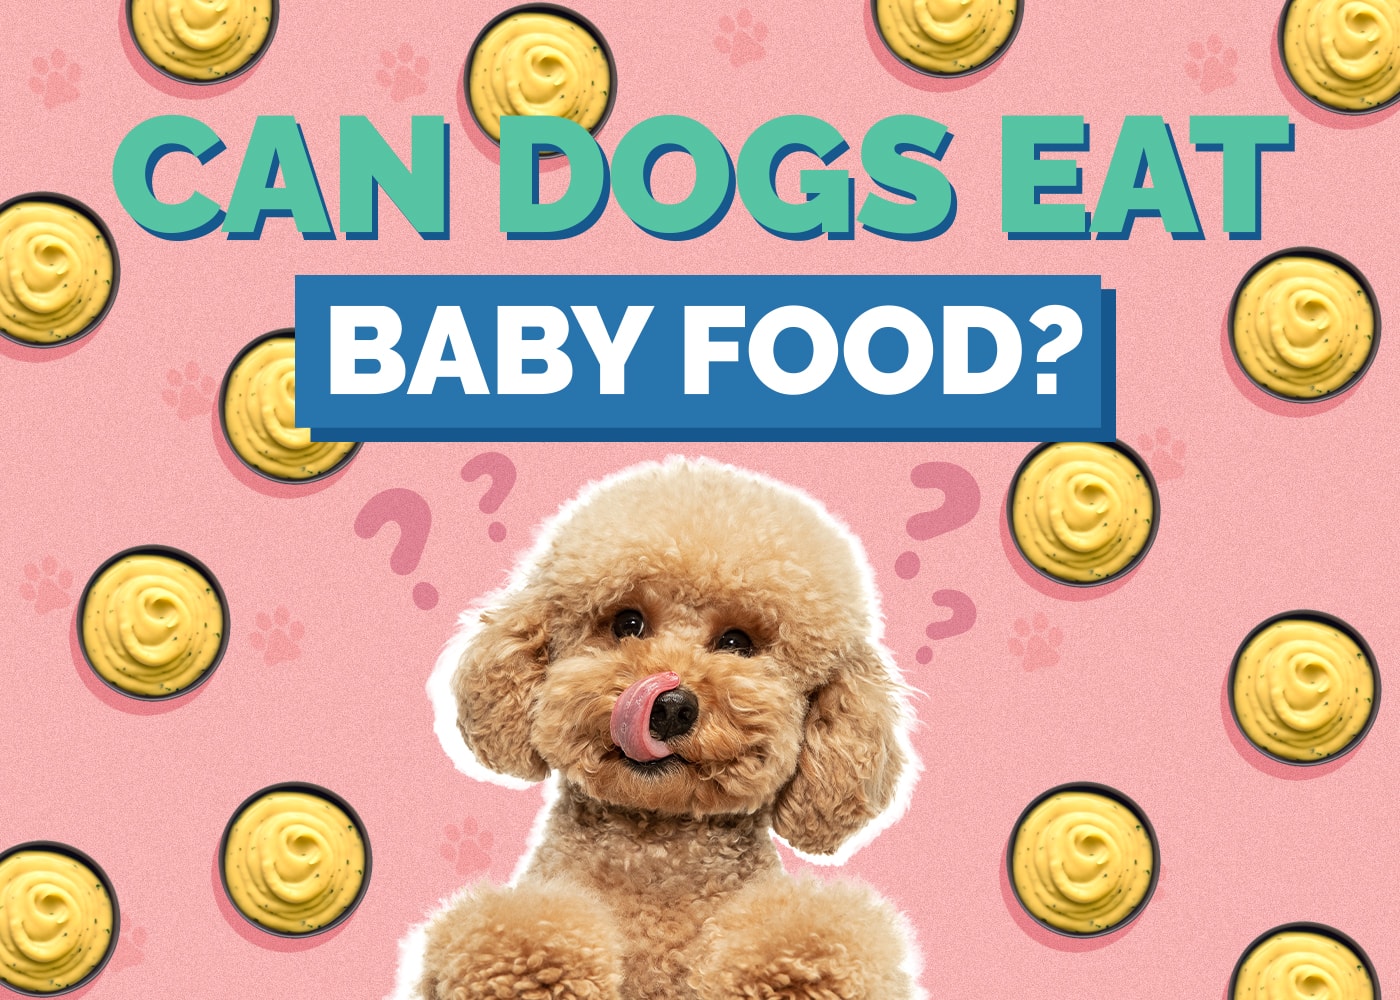 Can Dog Eat baby-food